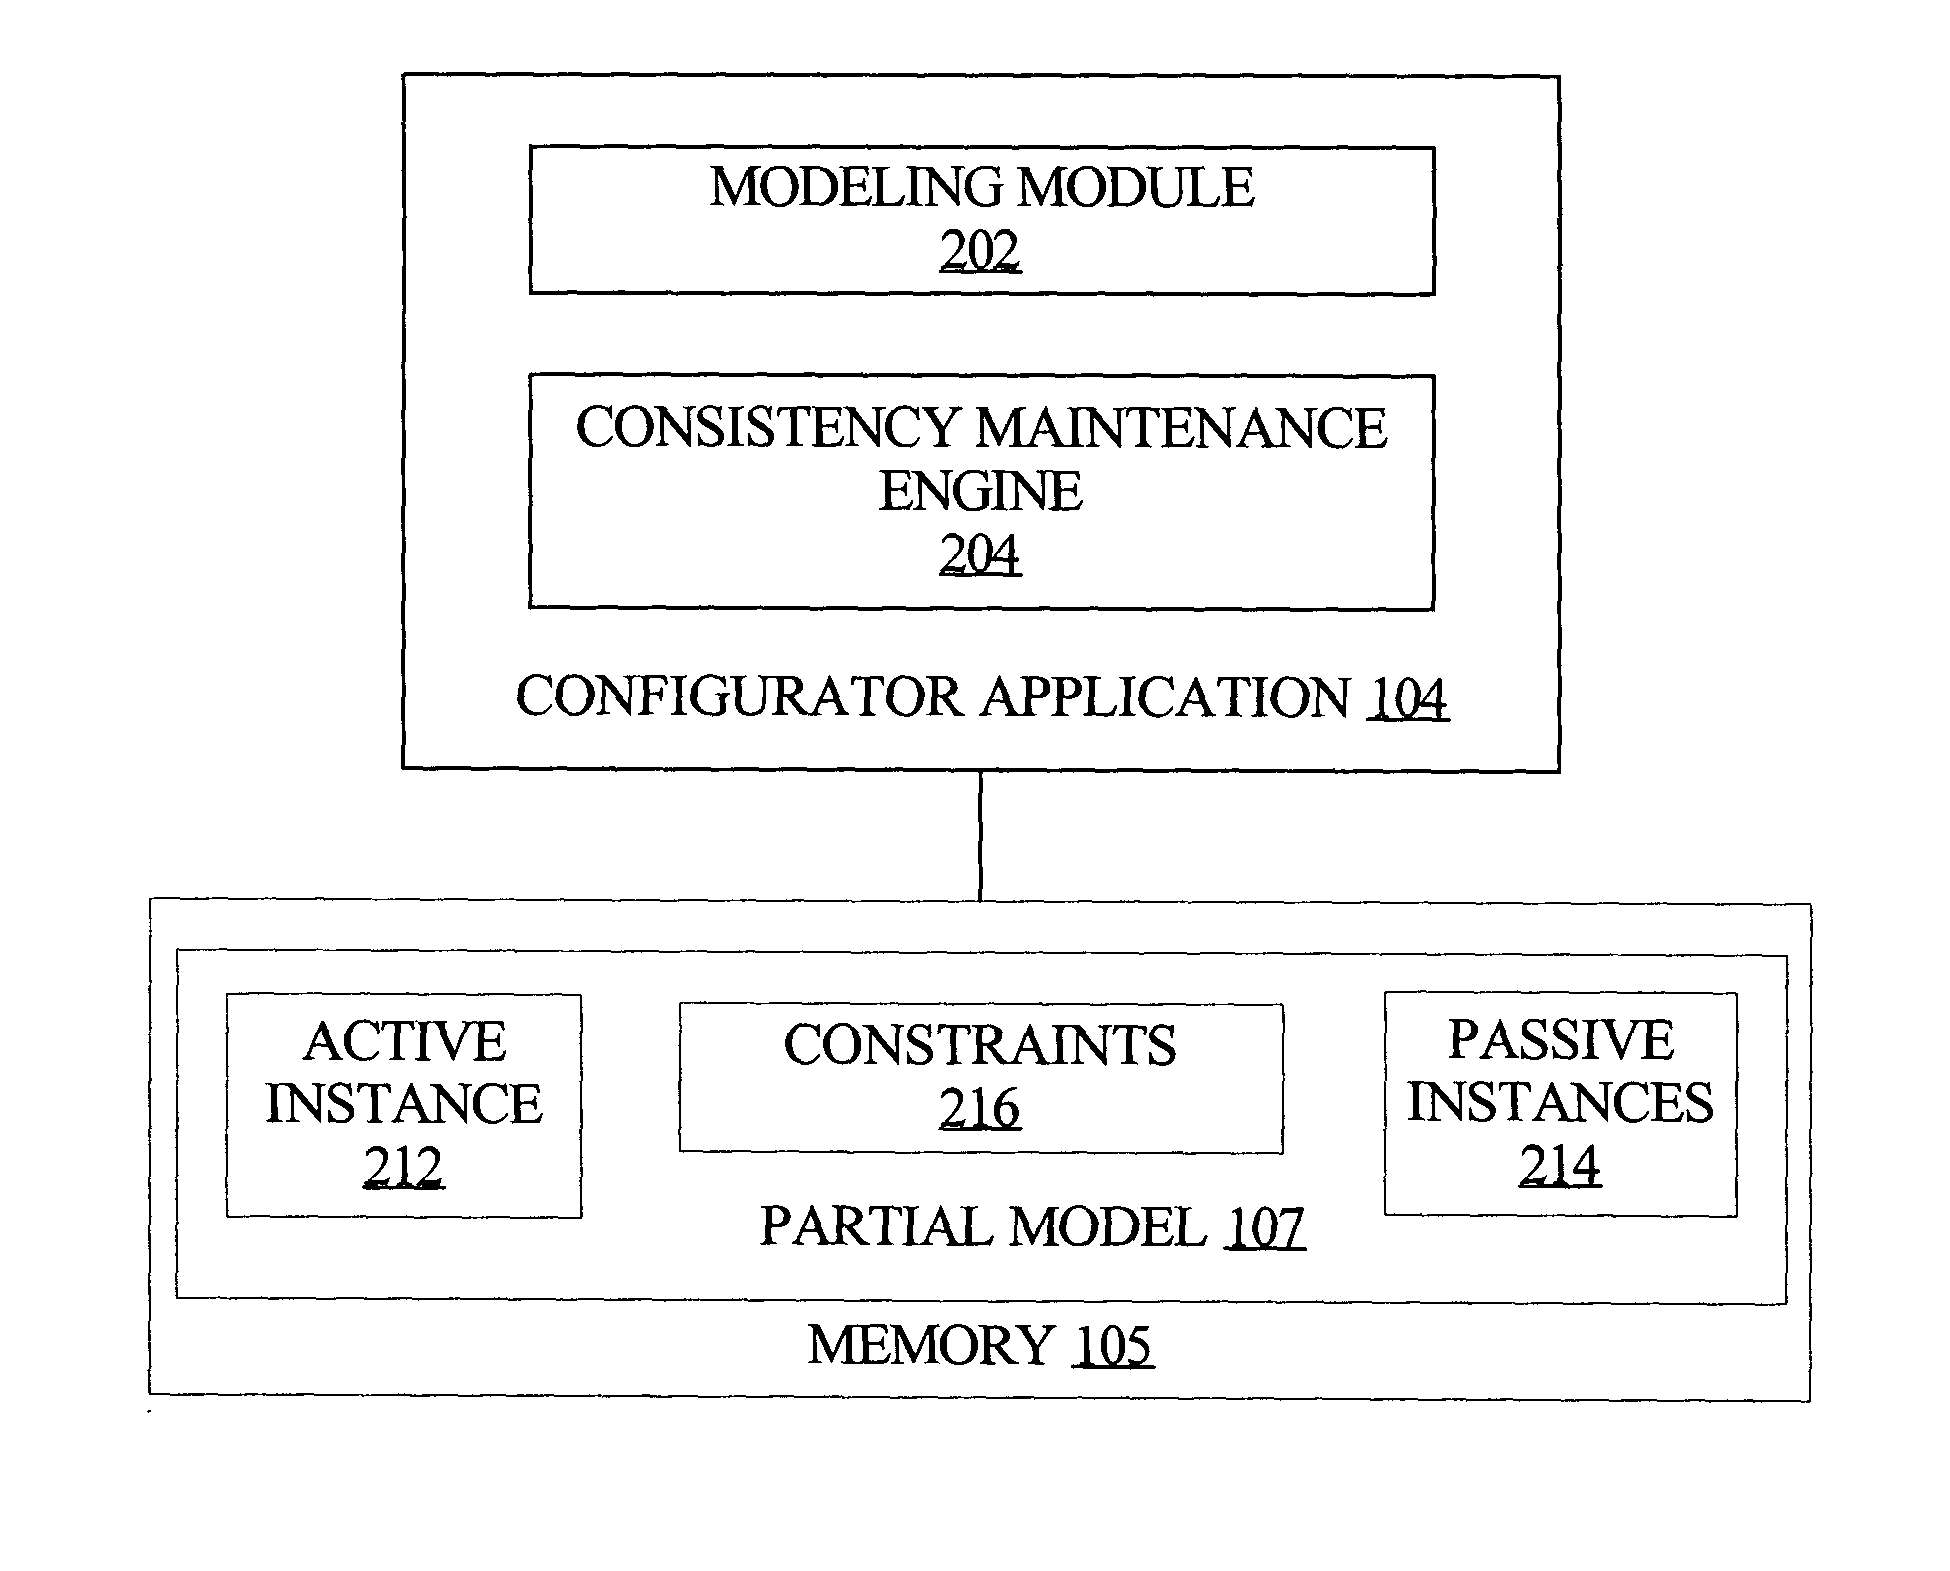 Techniques for partial loading of a configuration associated with a configuration model